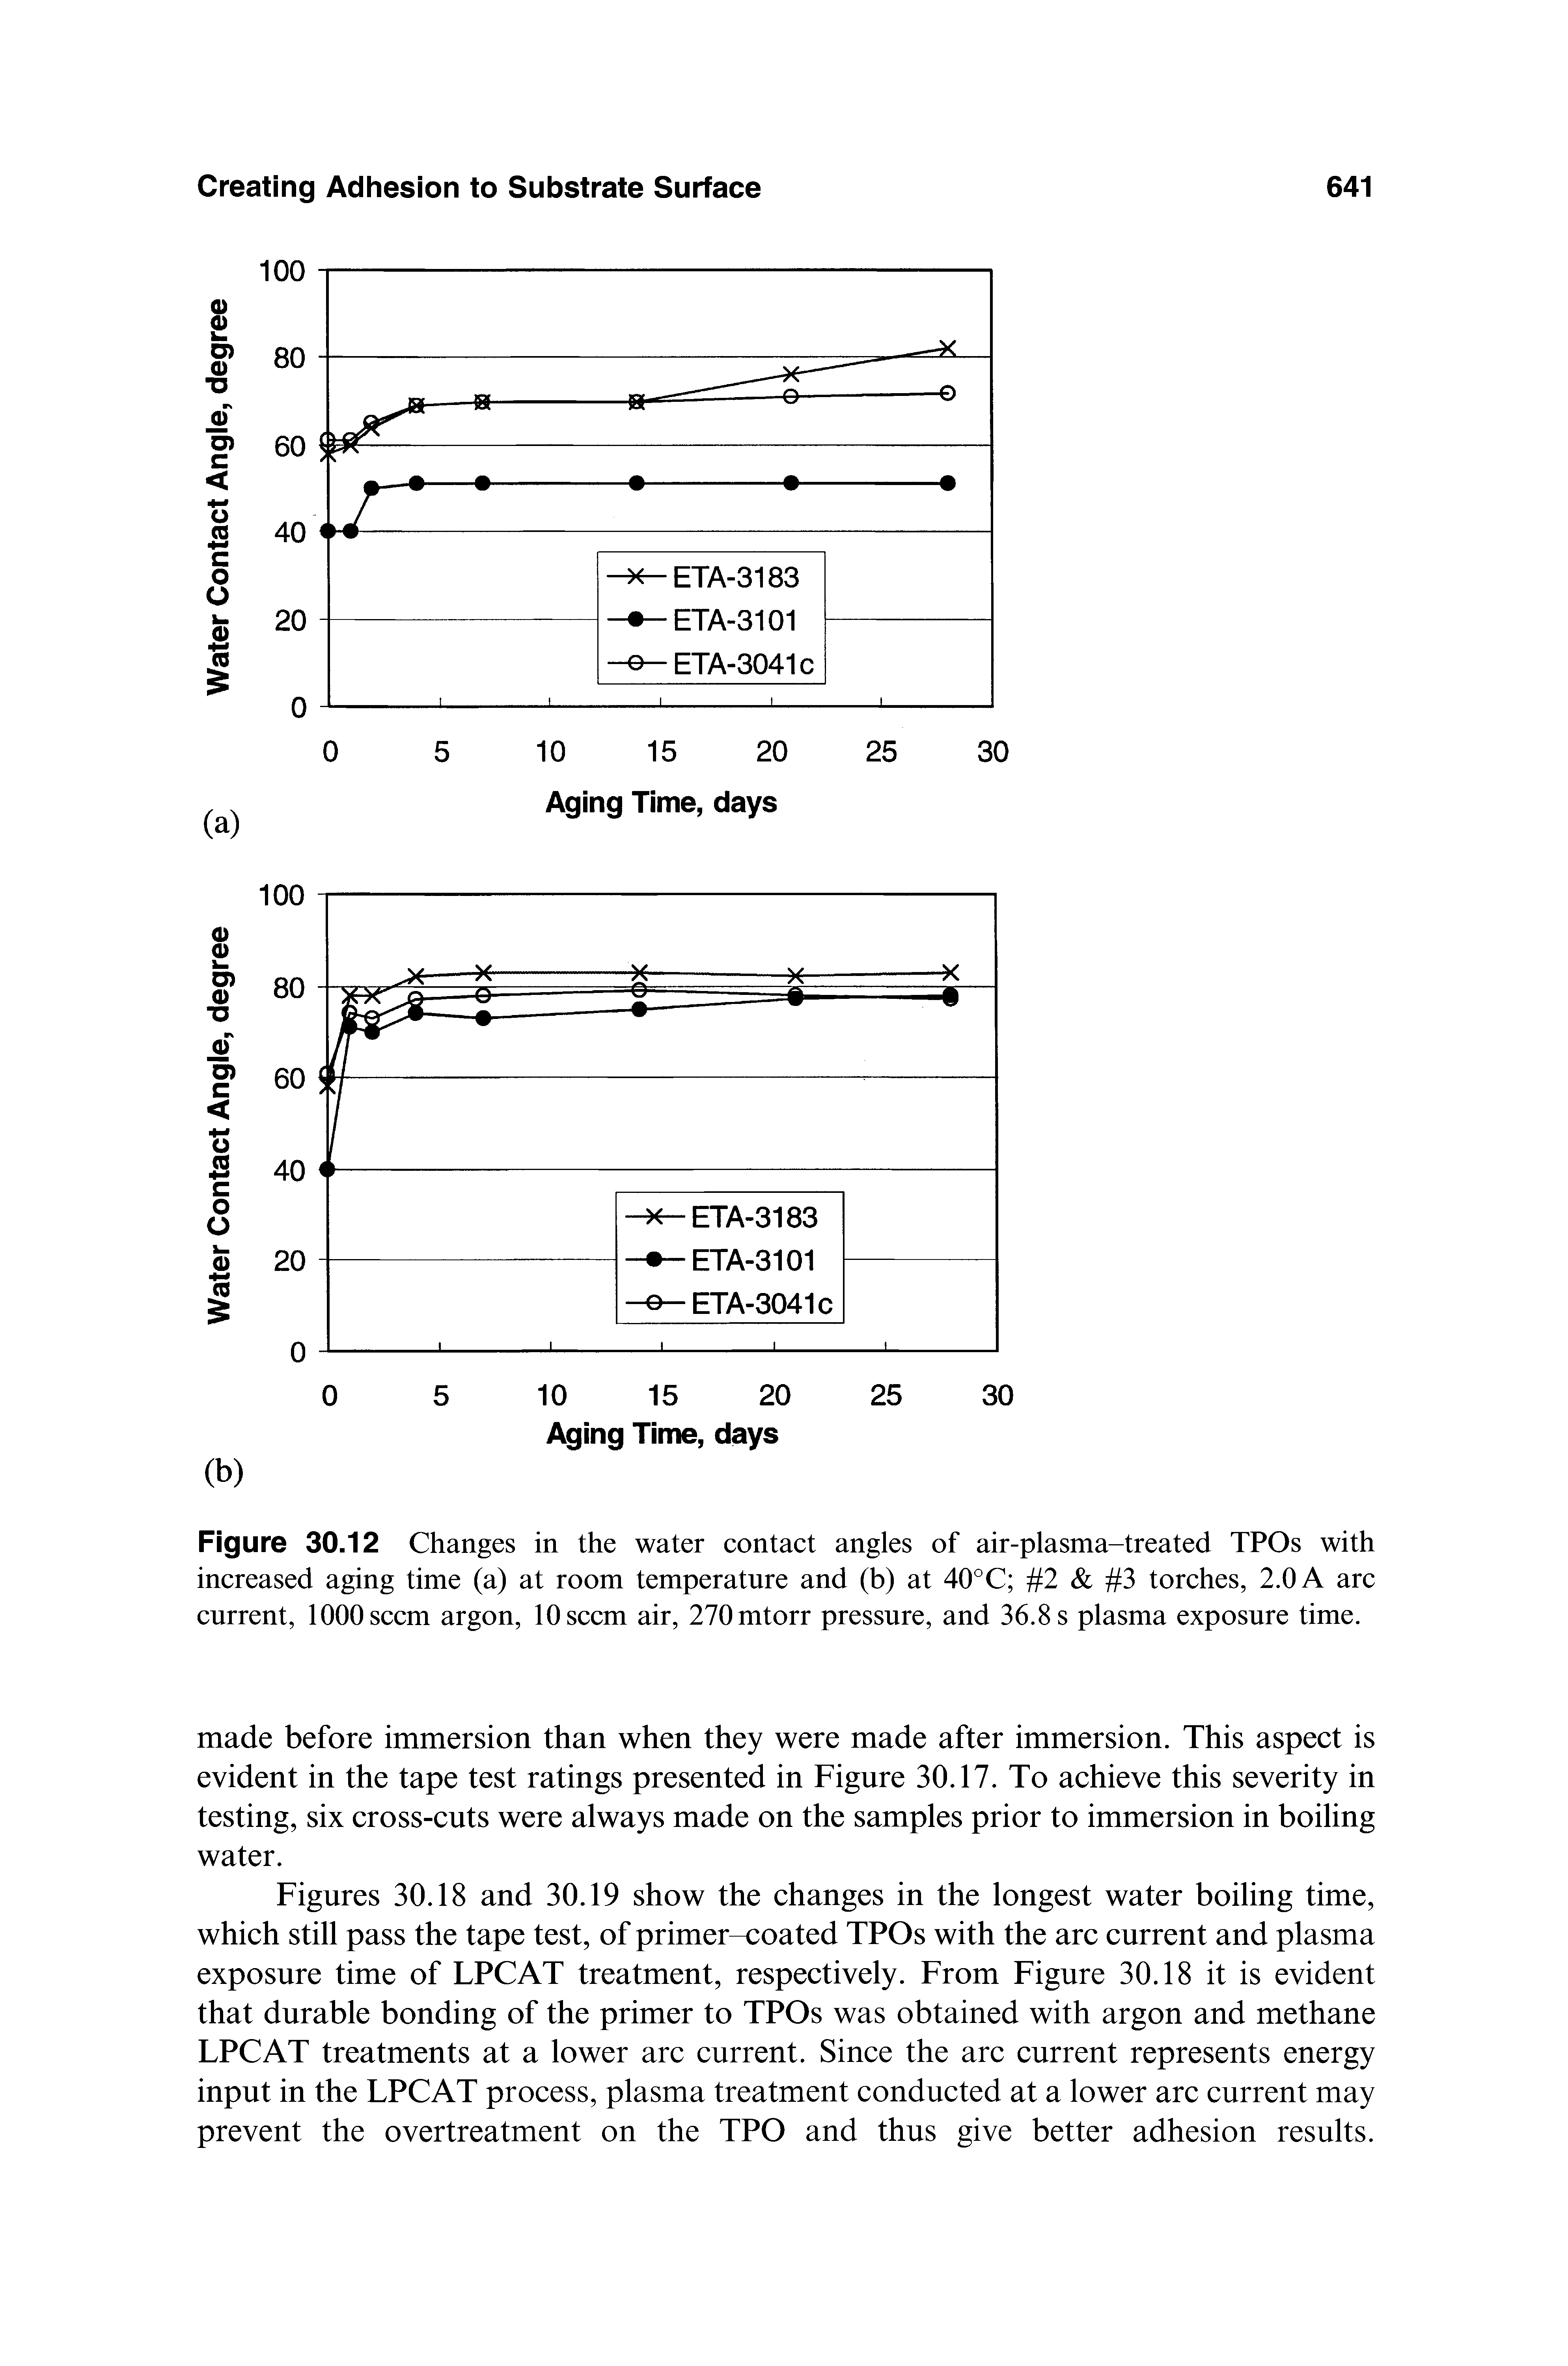 Figures 30.18 and 30.19 show the changes in the longest water boiling time, which still pass the tape test, of primer-coated TPOs with the arc current and plasma exposure time of LPCAT treatment, respectively. From Figure 30.18 it is evident that durable bonding of the primer to TPOs was obtained with argon and methane LPCAT treatments at a lower arc current. Since the arc current represents energy input in the LPCAT process, plasma treatment conducted at a lower arc current may prevent the overtreatment on the TPO and thus give better adhesion results.